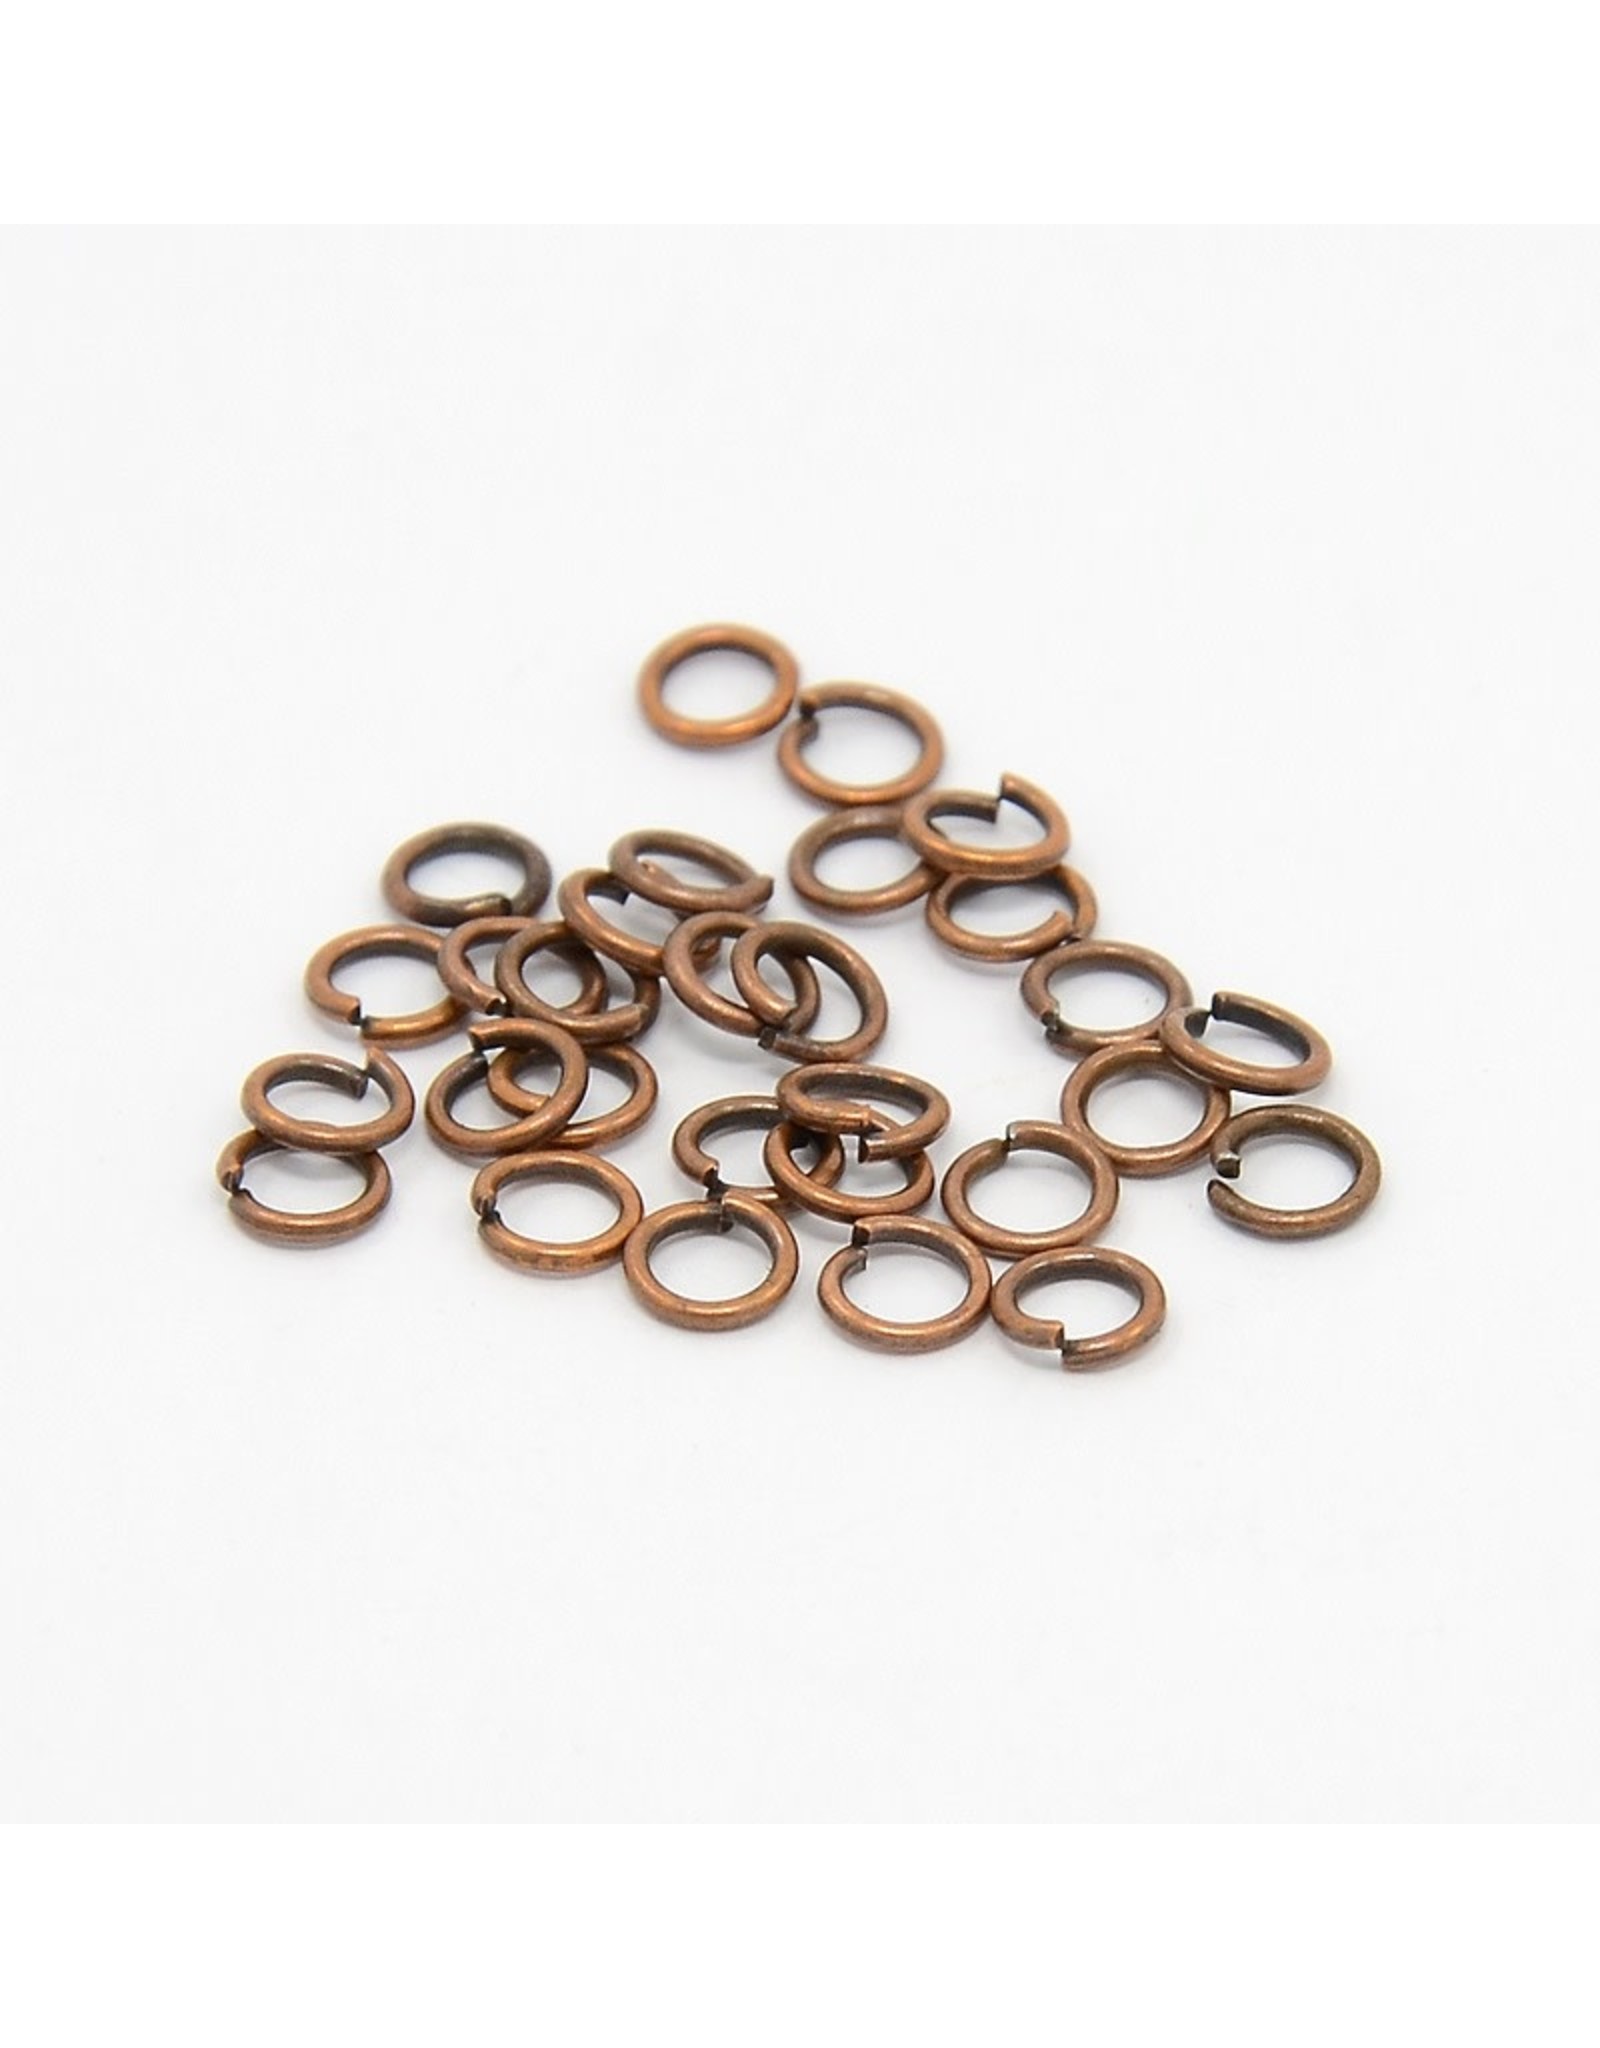 Jump Ring 4mm Antique Copper  approx 22g  x100 NF